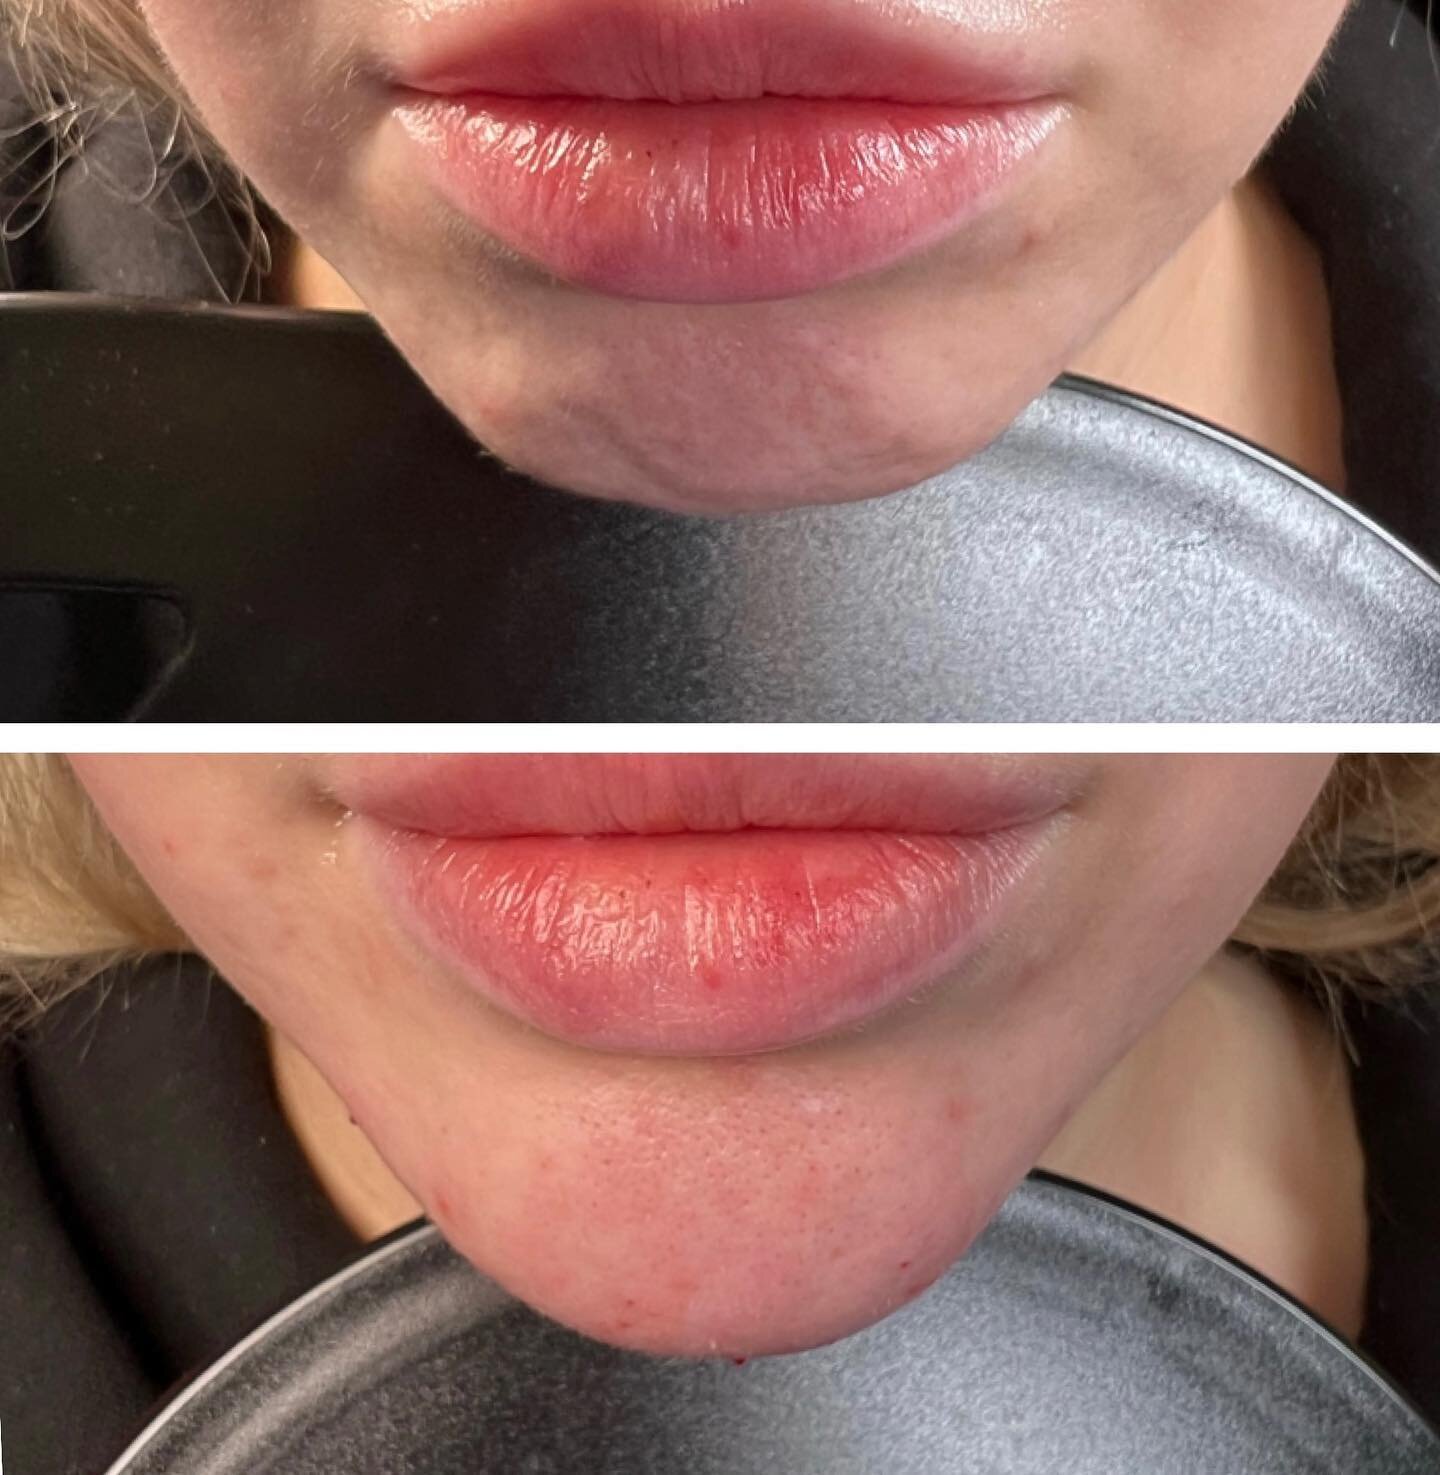 BIO FILLER has taken over Glam Lounge and I couldn&rsquo;t be happier!! Look at this BEAUTIFUL CHIN! 100% natural. 100% vegan. ALL YOU!! No synthetic materials, no migration, no lumps, bumps or risk of disproportionate angles. It interfaces seamlessl